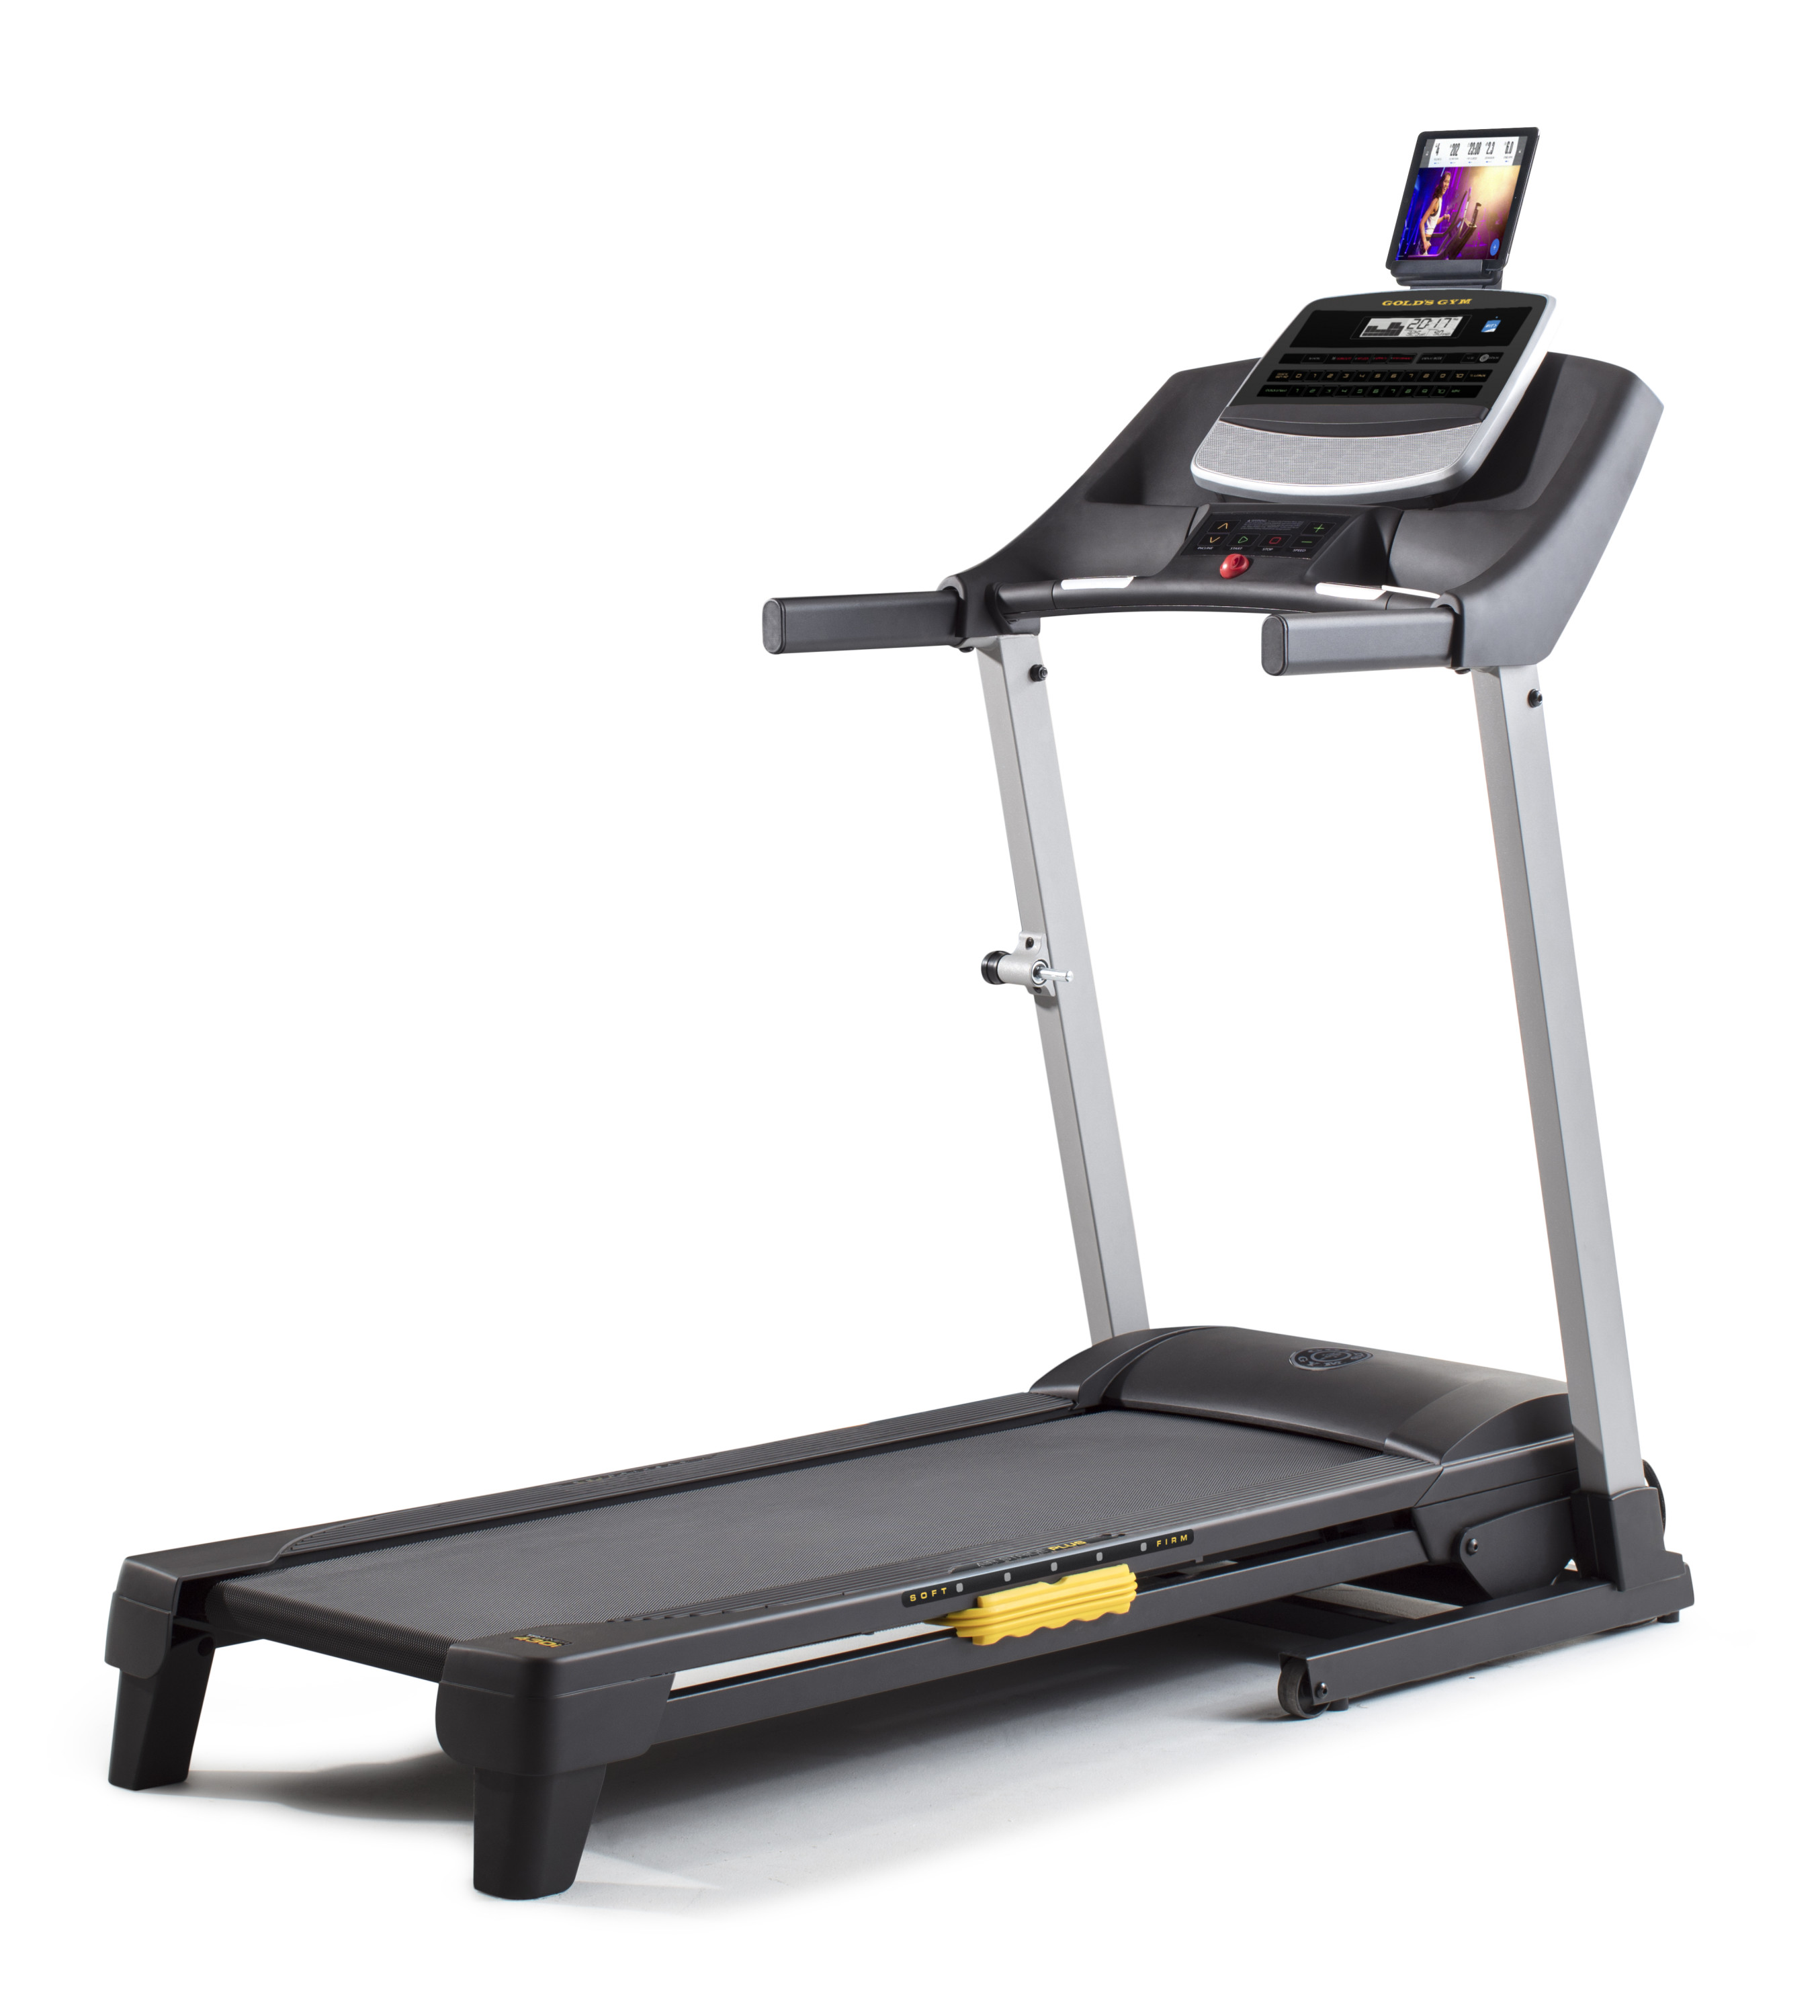 ProForm Trainer 430i Folding Smart Treadmill with 10% Incline, iFit Bluetooth Enabled - image 6 of 18